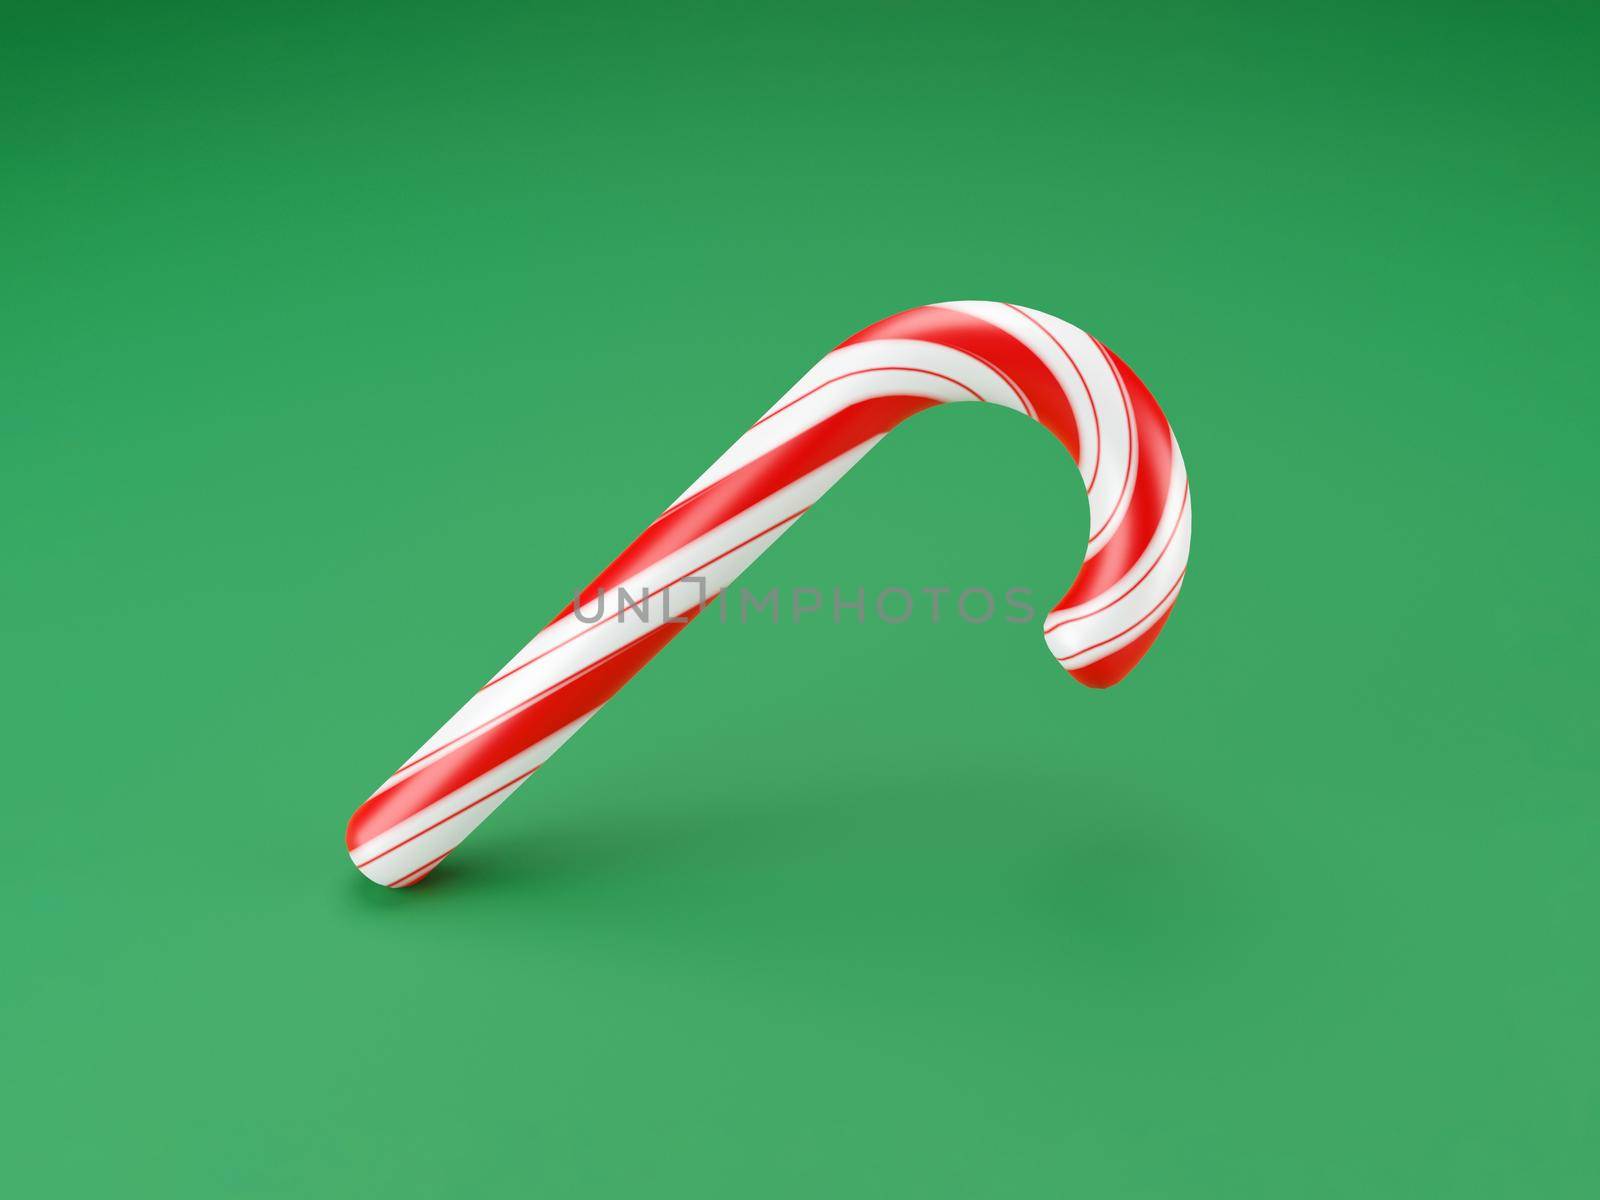 Merry Christmas canes, lollipop mint candy with red stripes on green background. New Years celebration concept. Traditional sweet dessert. 3d render